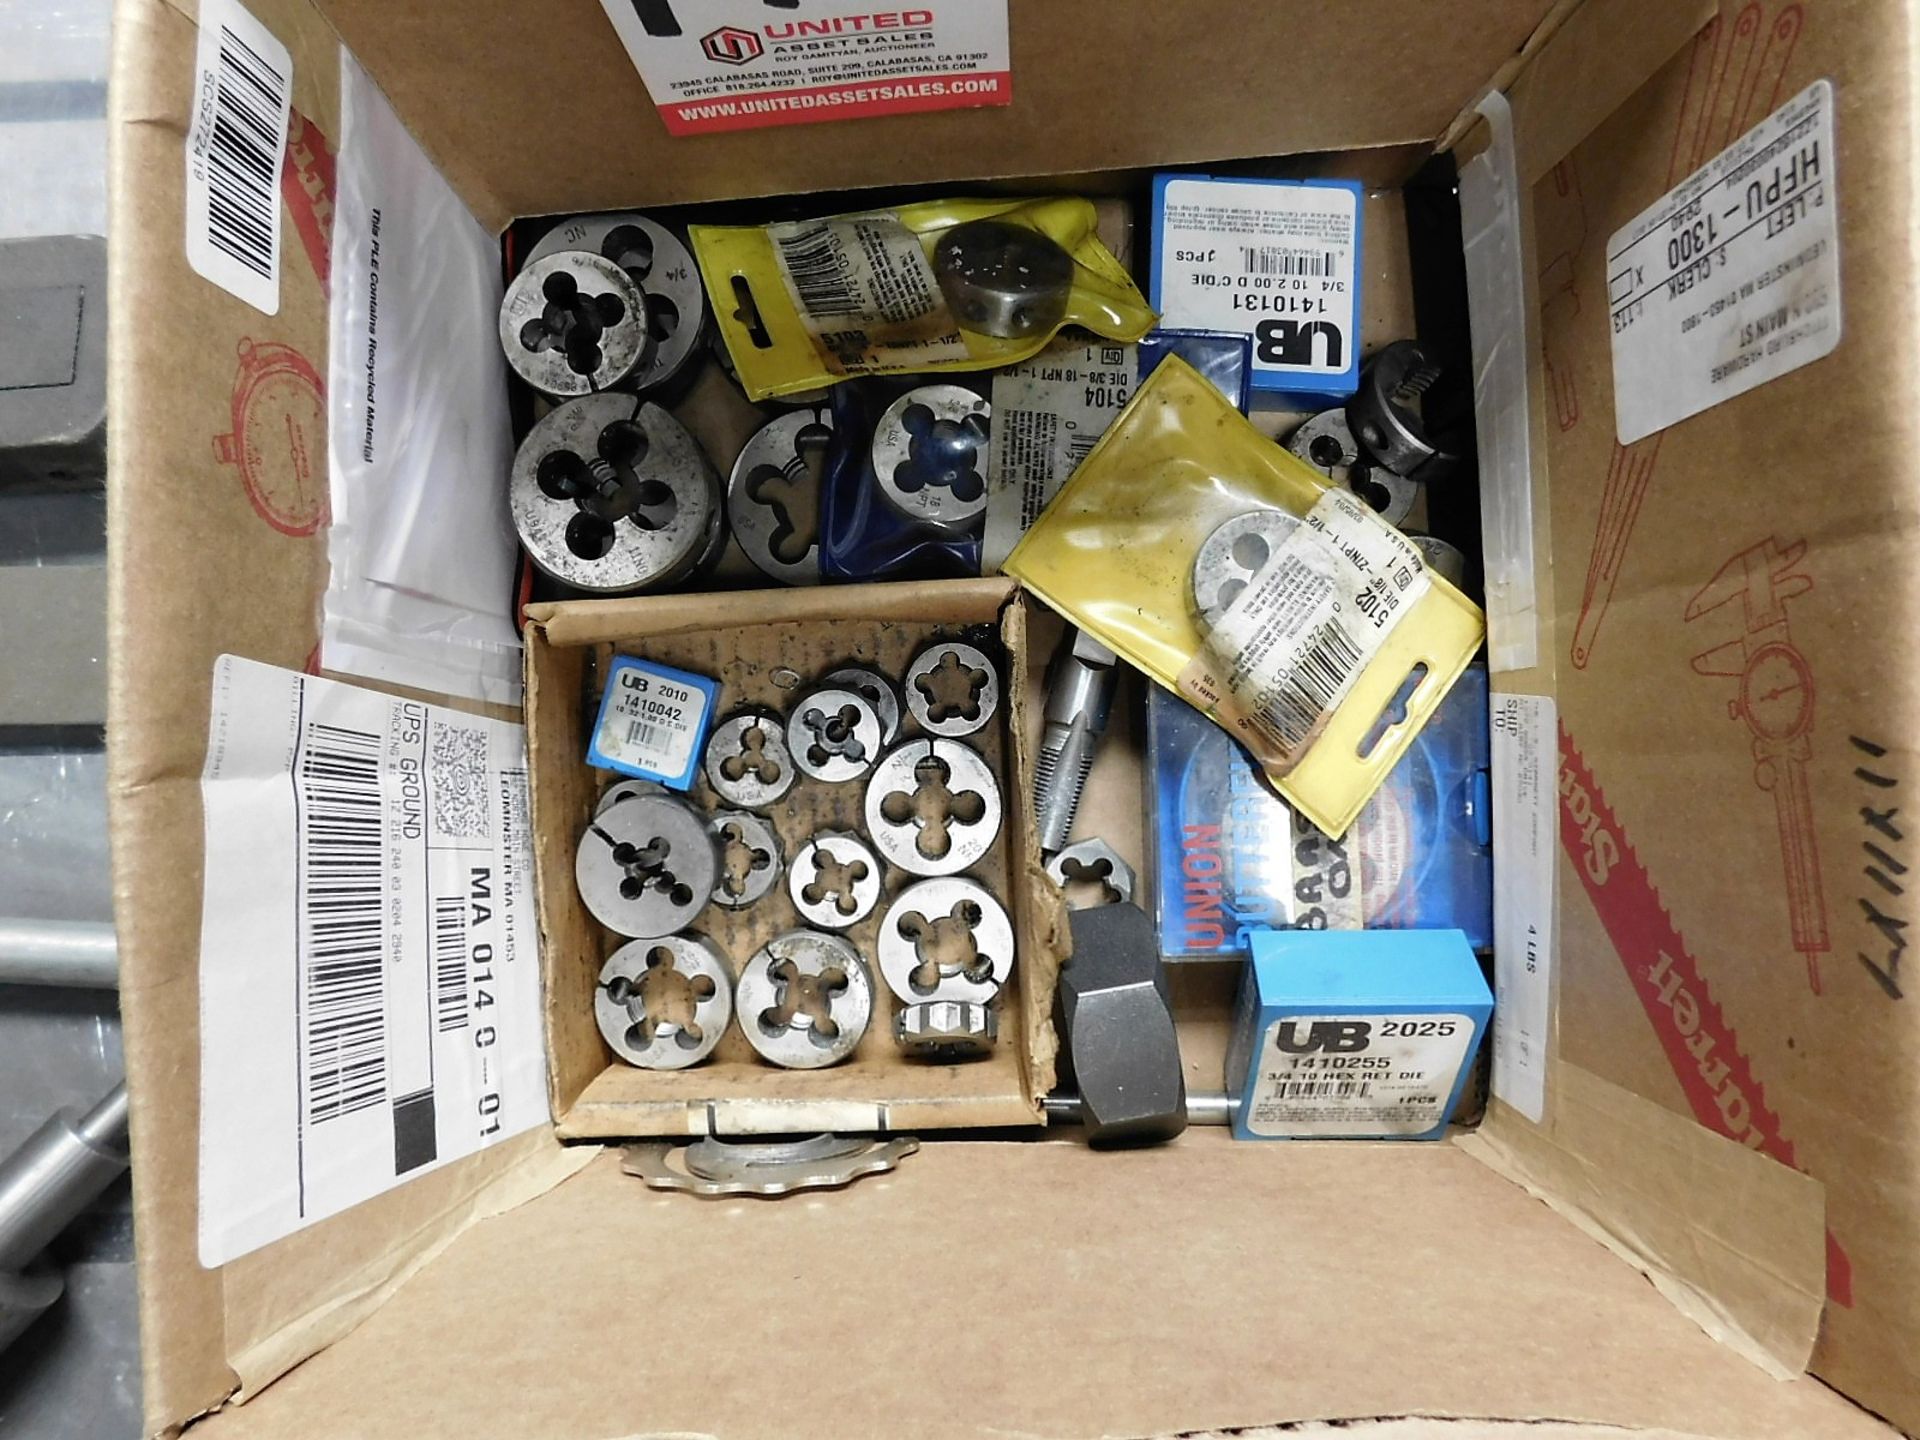 LOT - LARGE QUANTITY OF THREAD TAPS AND DIES, W/ TOOLS, TOO MANY TO LIST - Image 5 of 6